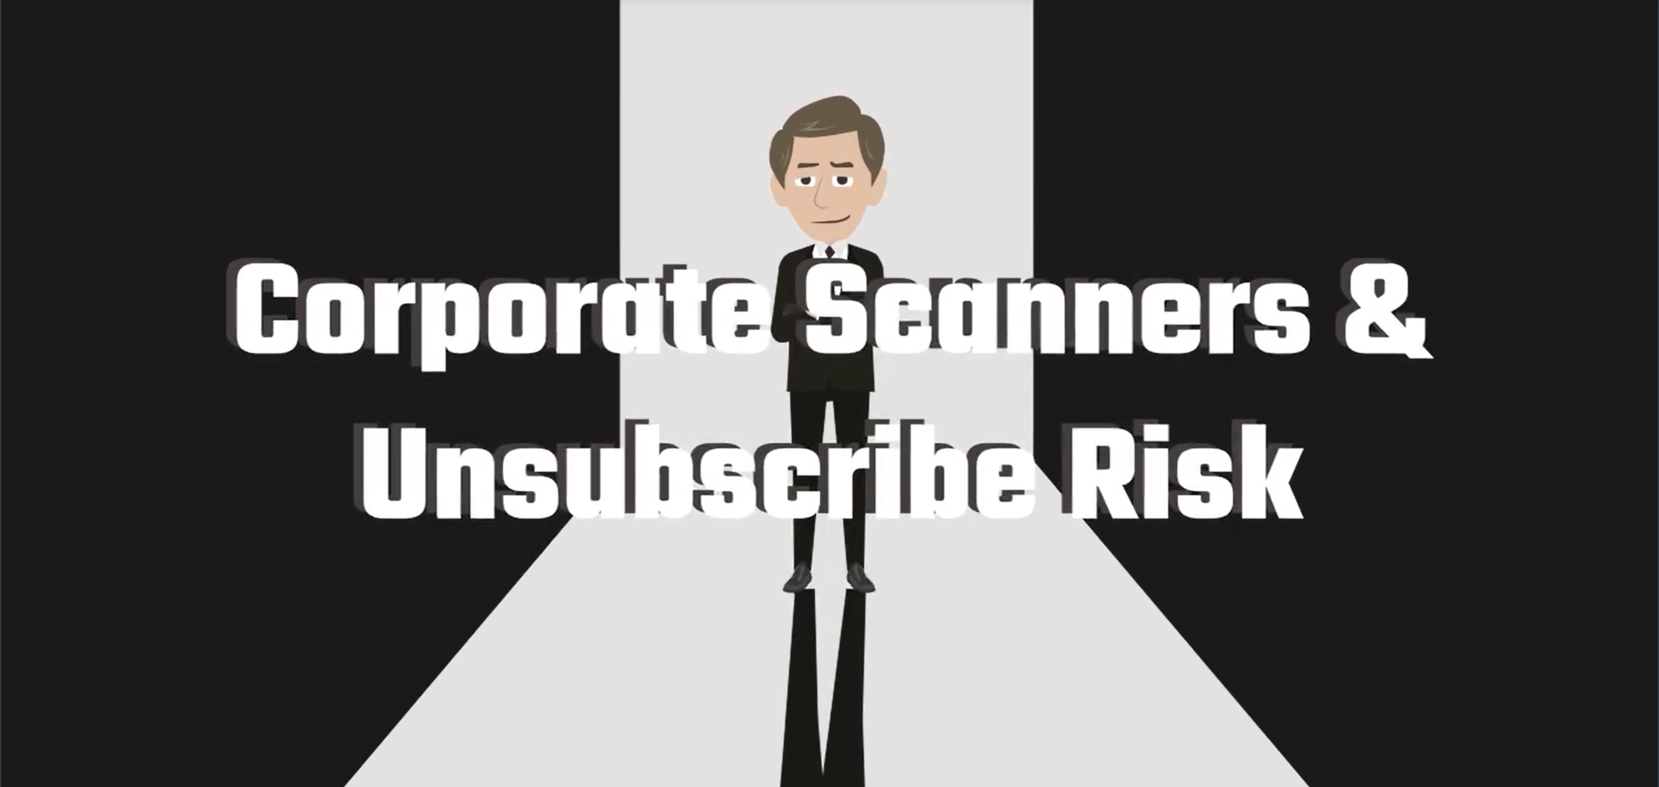 Corporate scanners and unsubscribe risk